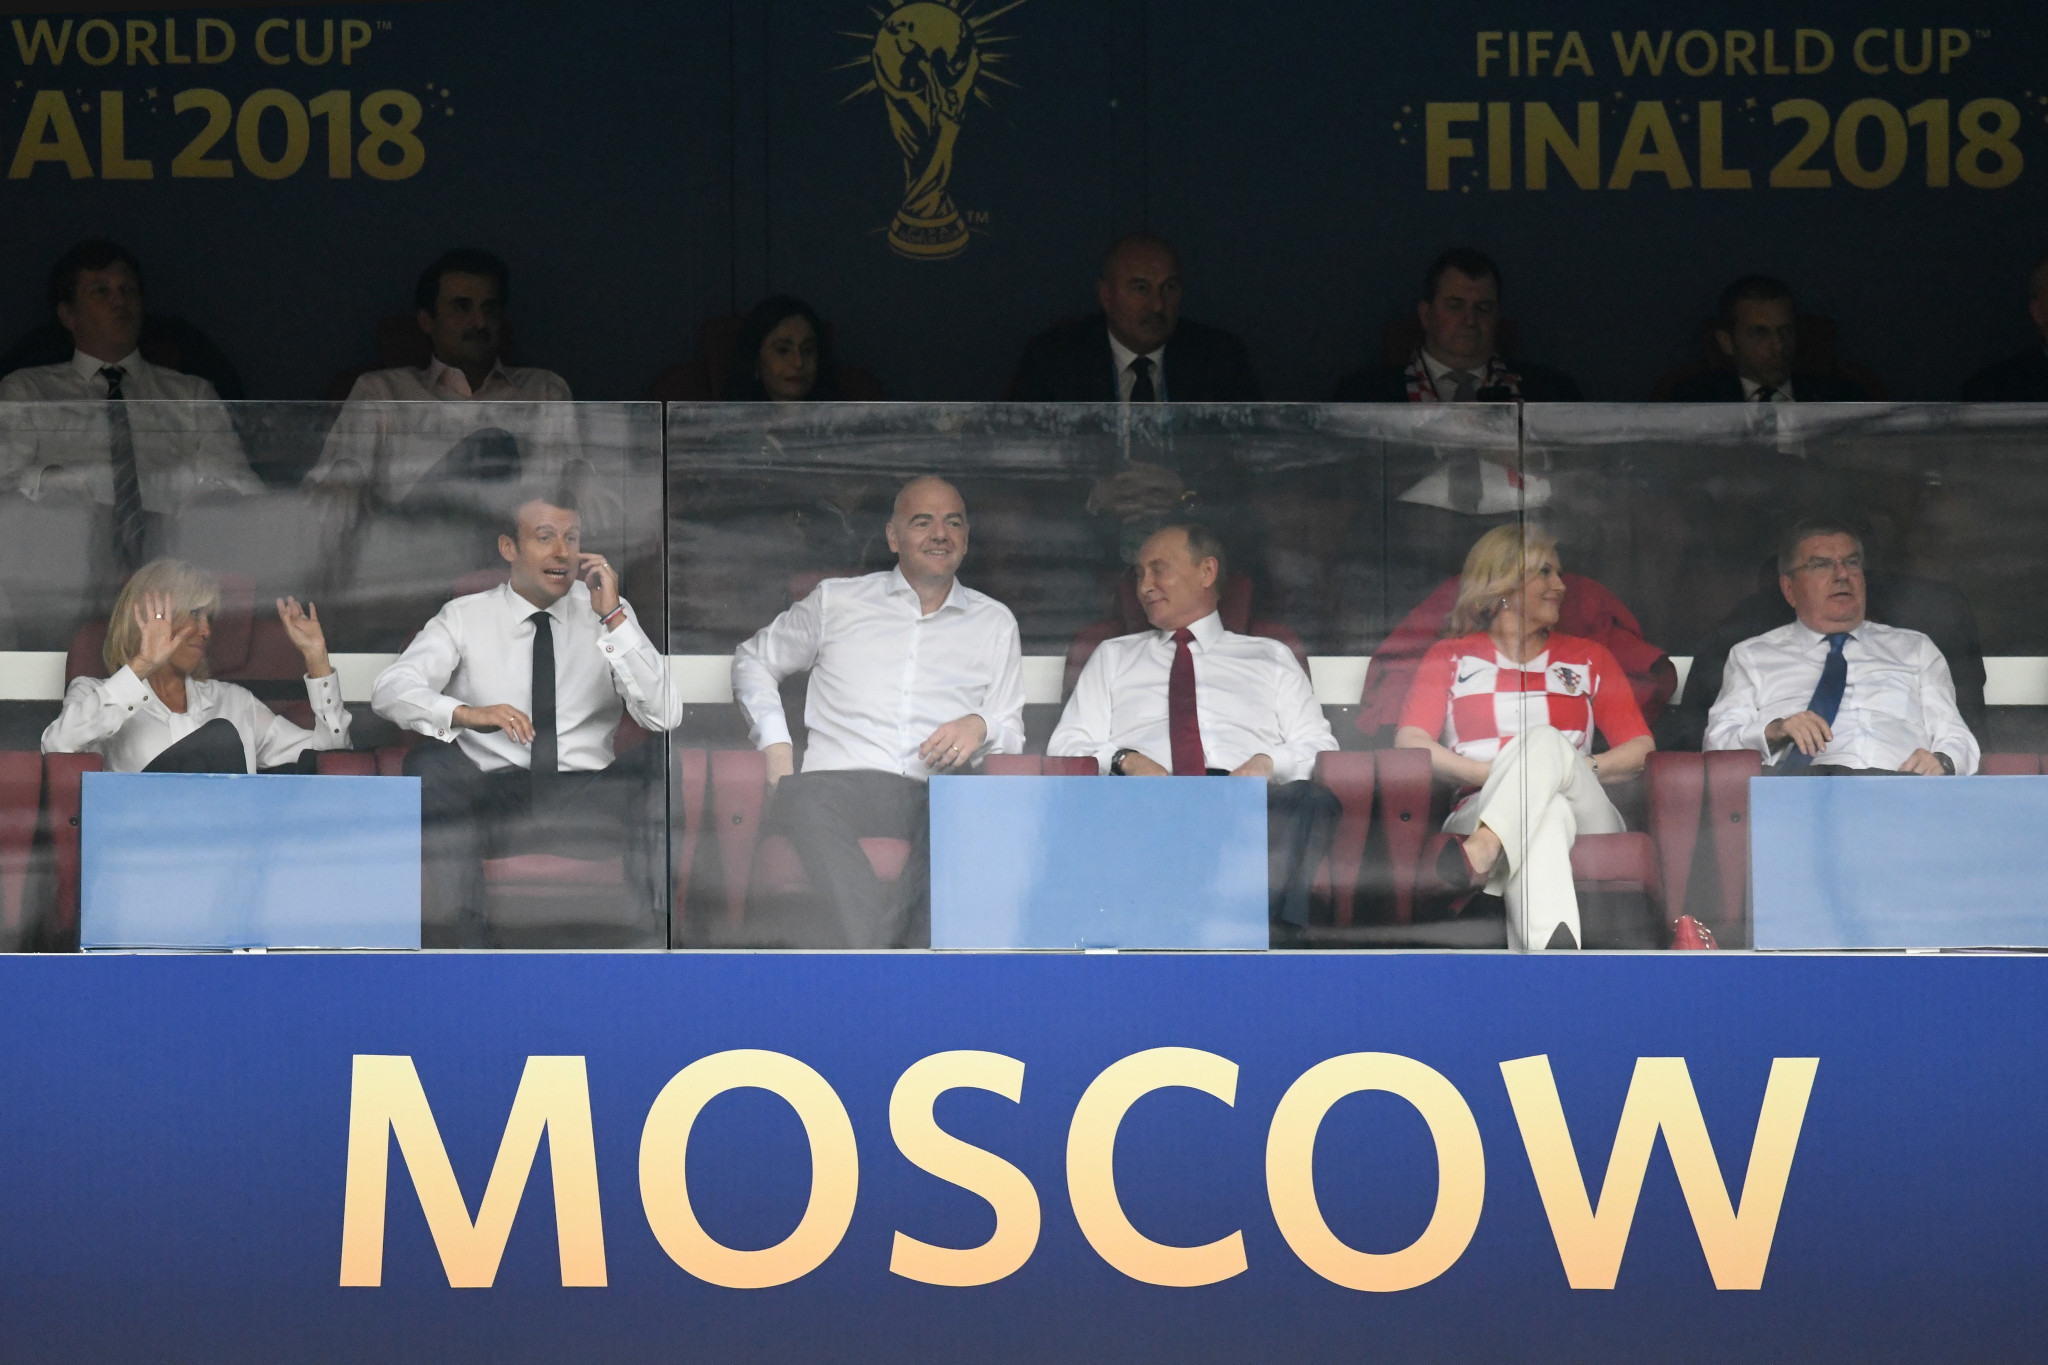 FIFA President Gianni Infantino, middle left, Russian President Vladimir Putin, middle right, and IOC President Thomas Bach, right, attended the 2018 World Cup final together ©Getty Images